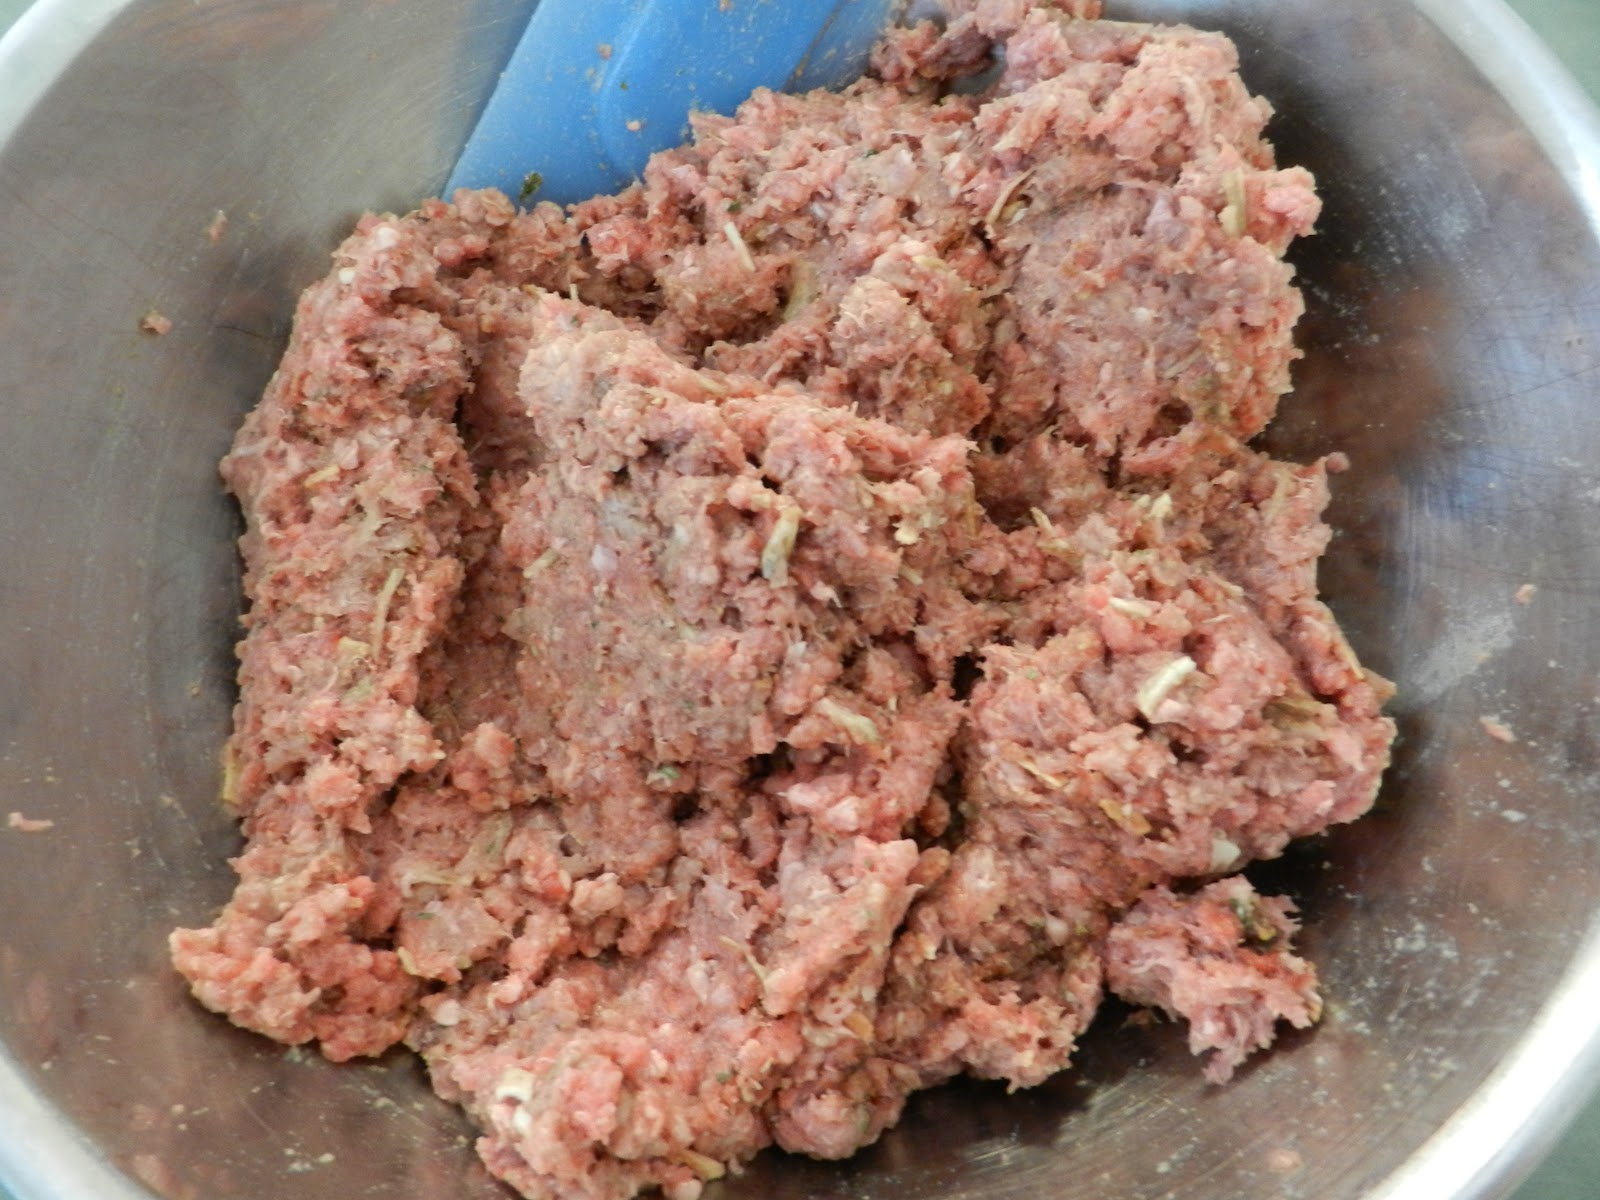 How long is thawed out ground beef good for?